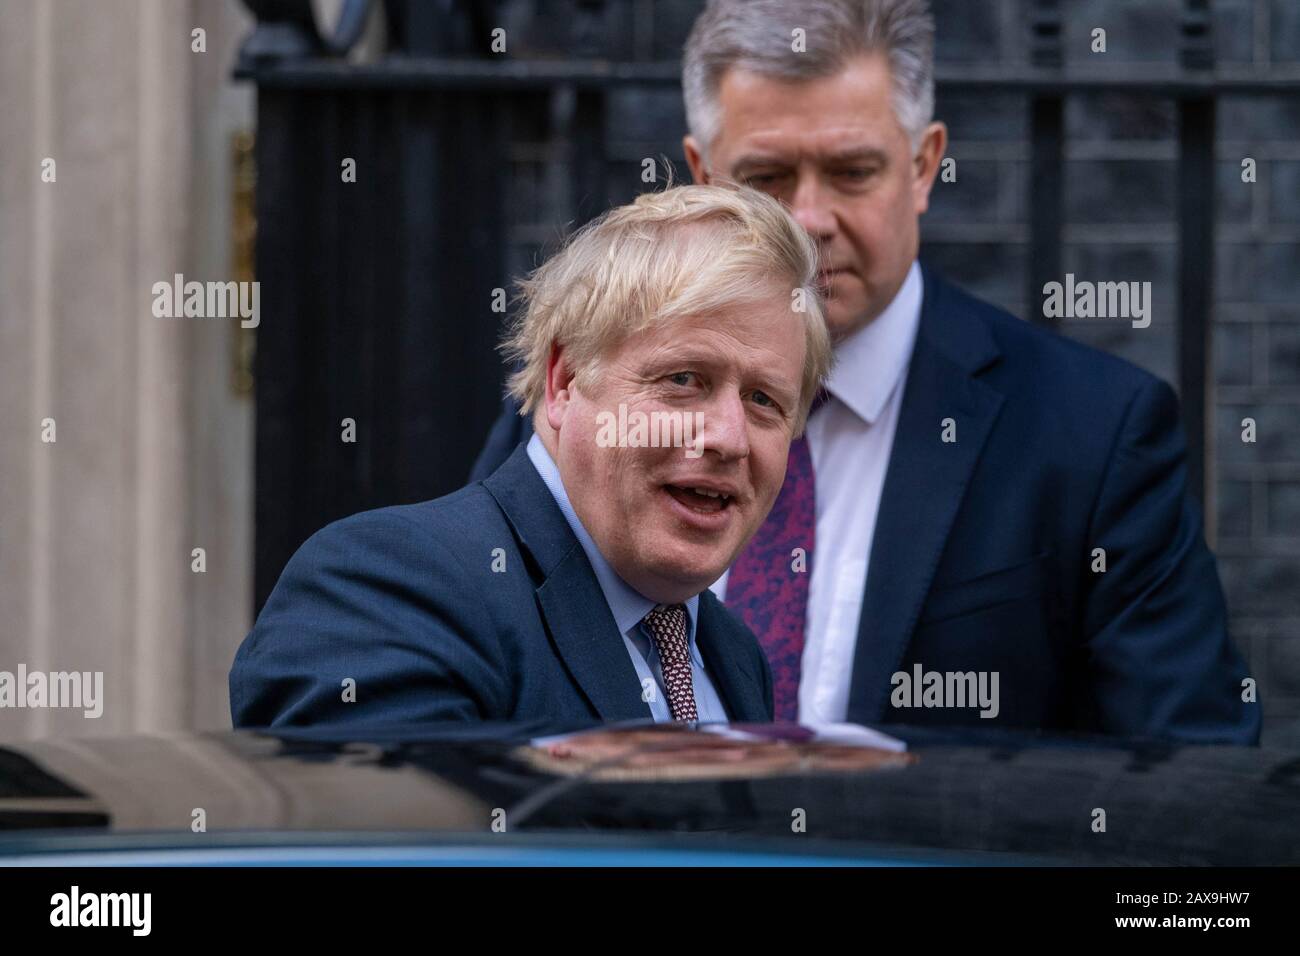 London, UK. 11th Feb, 2020. Boris Johnson MP PC Prime Minister leaves a special Cabinet meeting to discuss HS2 at 10 Downing Street, London Credit: Ian Davidson/Alamy Live News Stock Photo